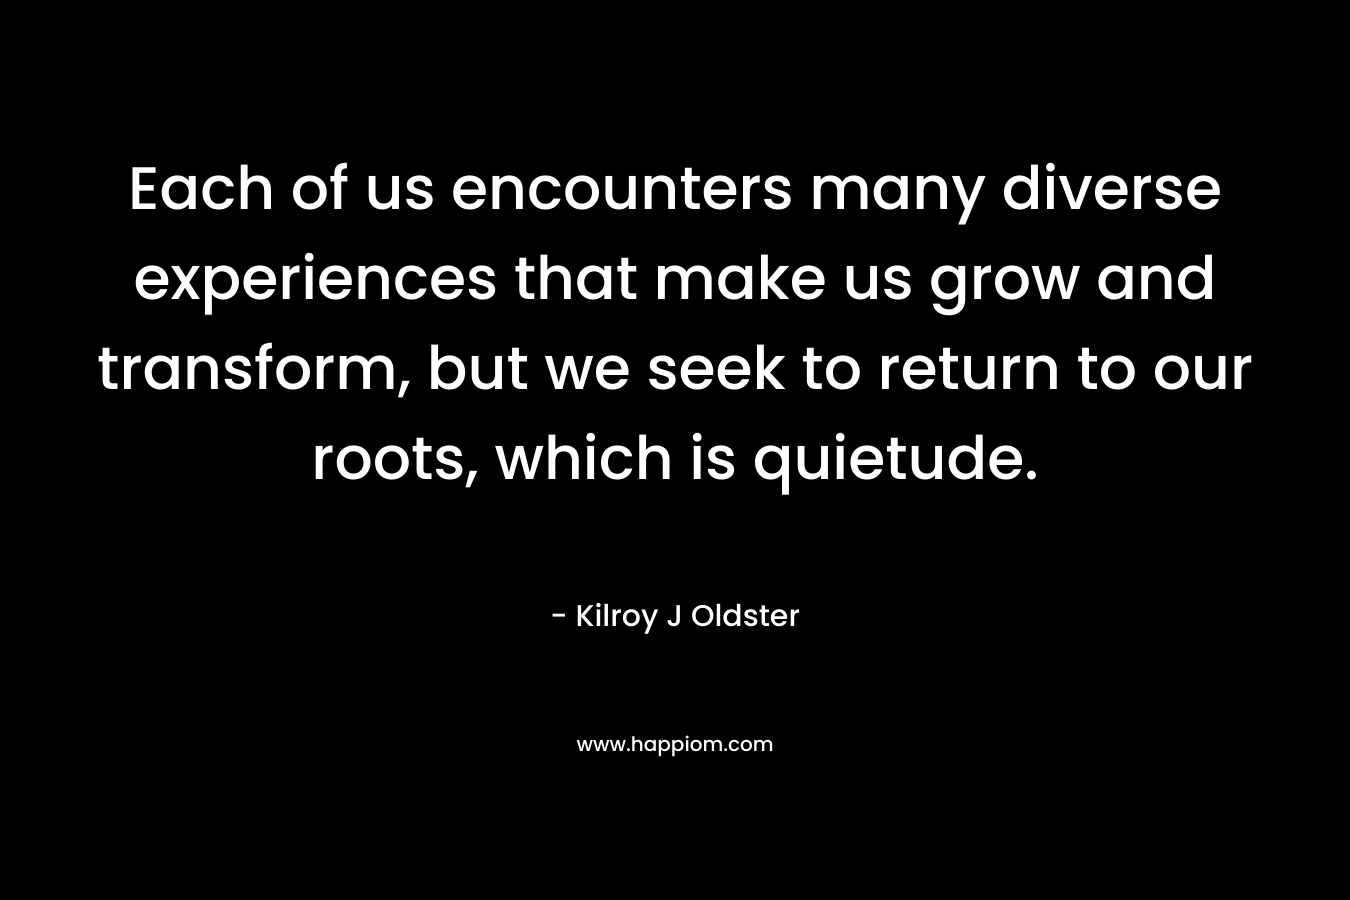 Each of us encounters many diverse experiences that make us grow and transform, but we seek to return to our roots, which is quietude.